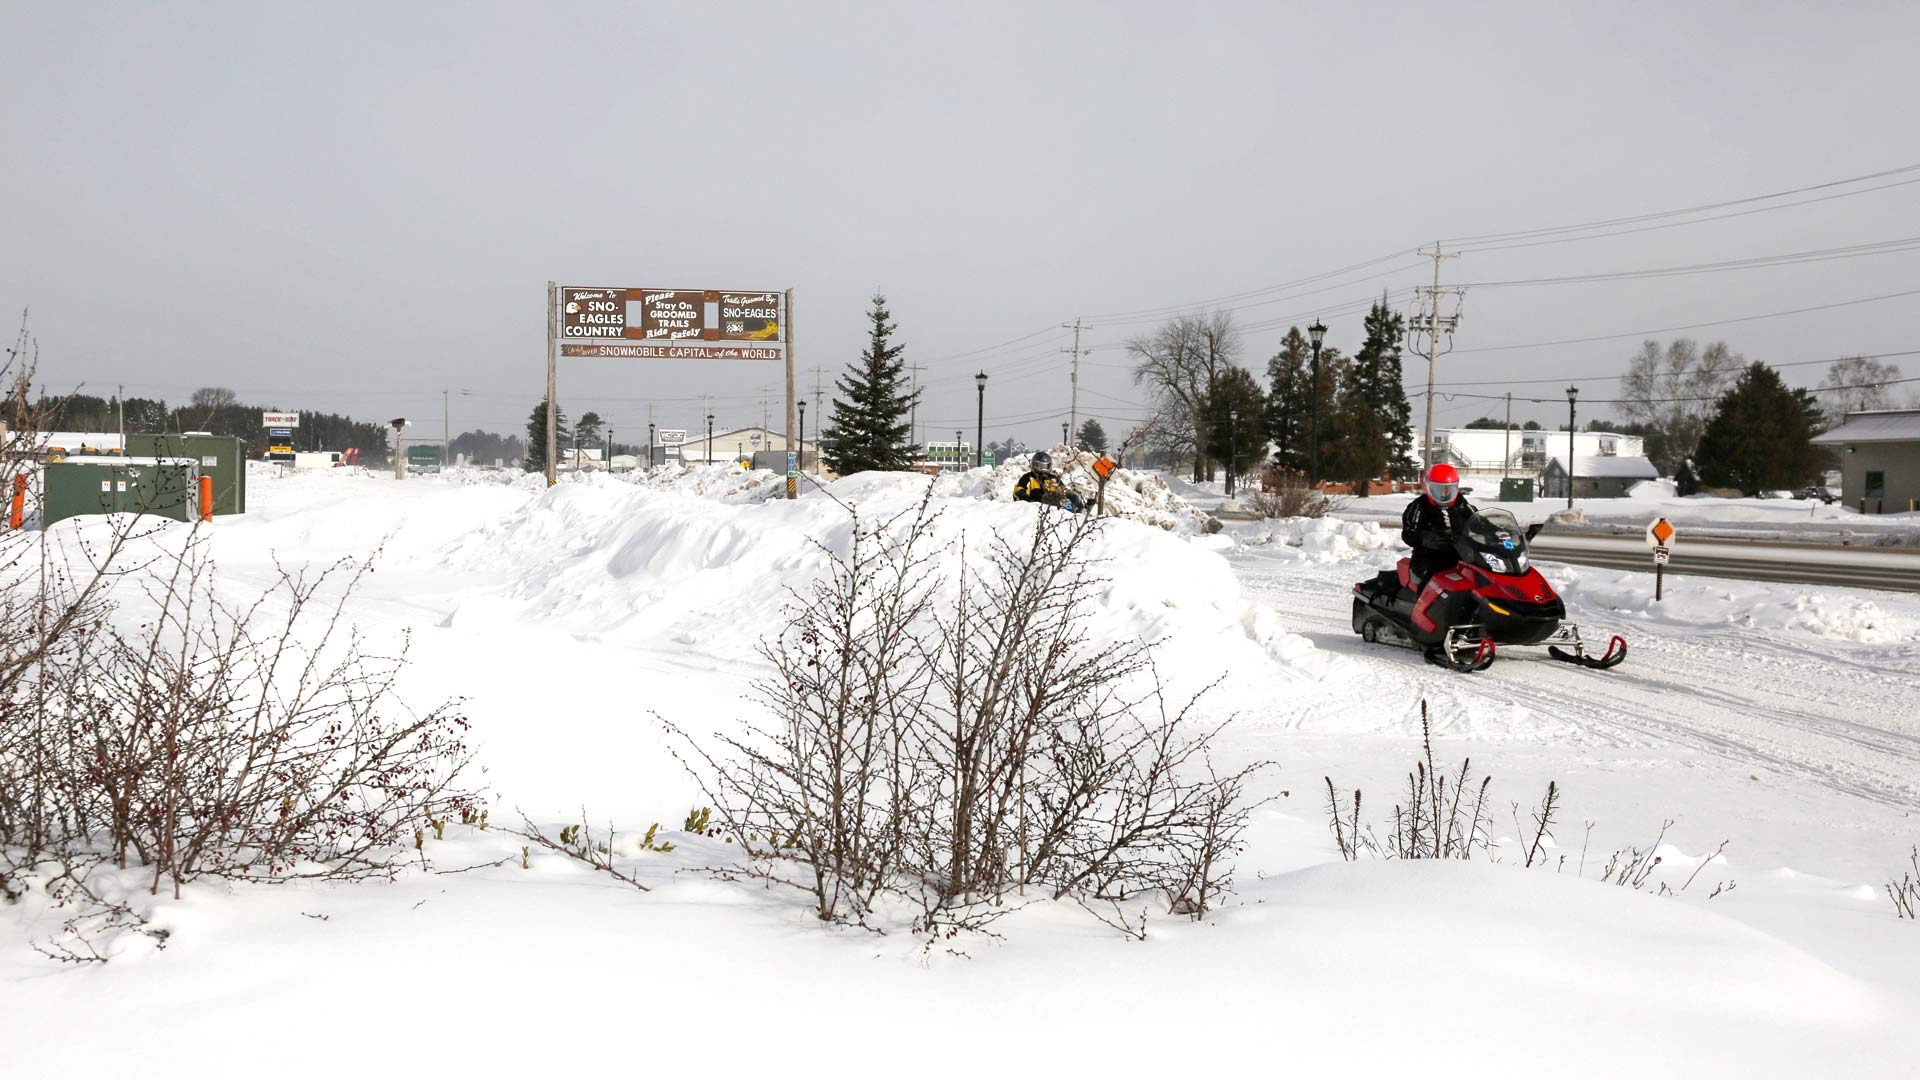 Snowmobilers on Sno-Eagles trails in Vilas County, Wisconsin